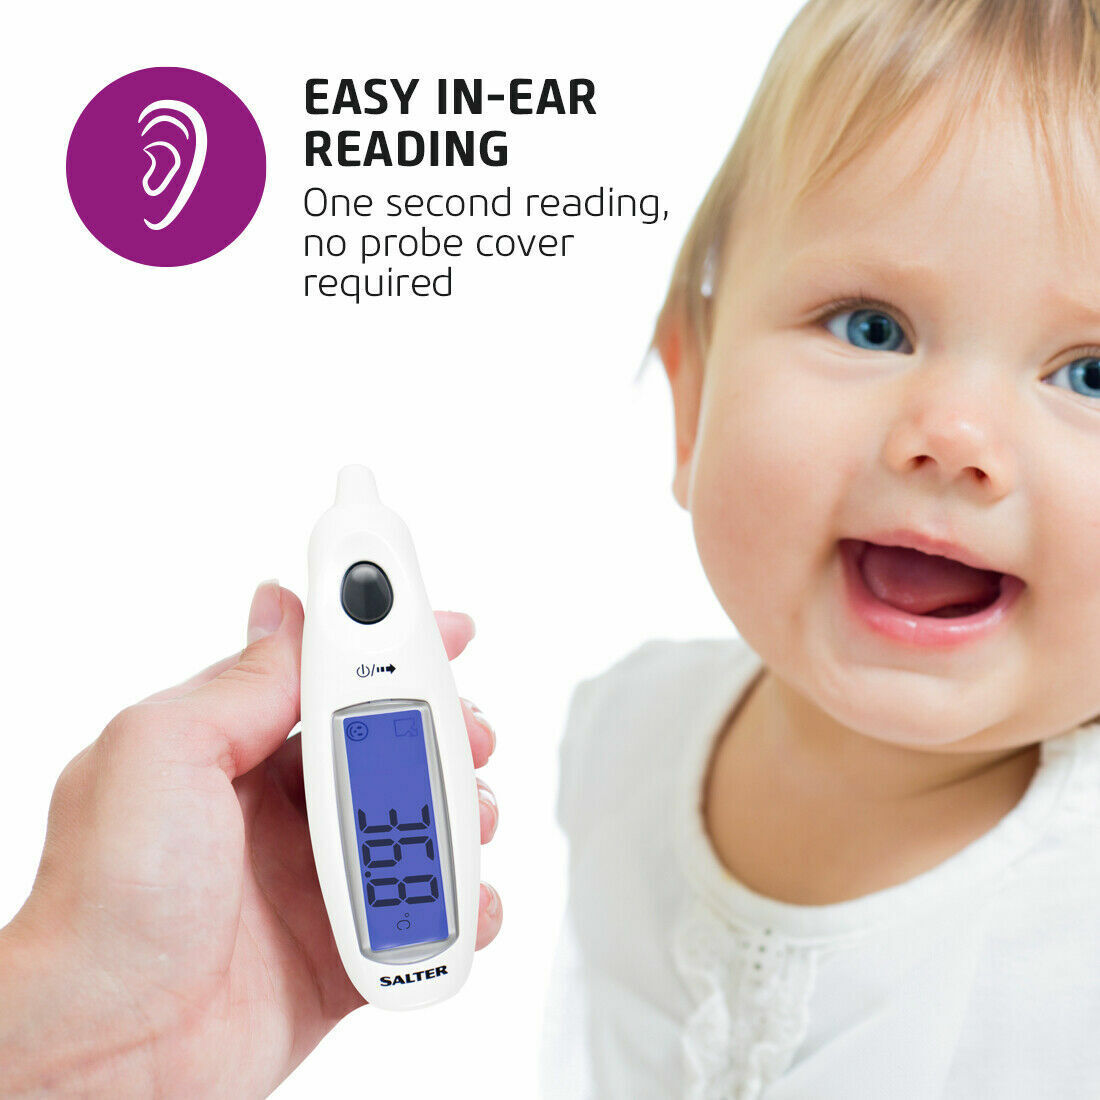 Best Ear Thermometer